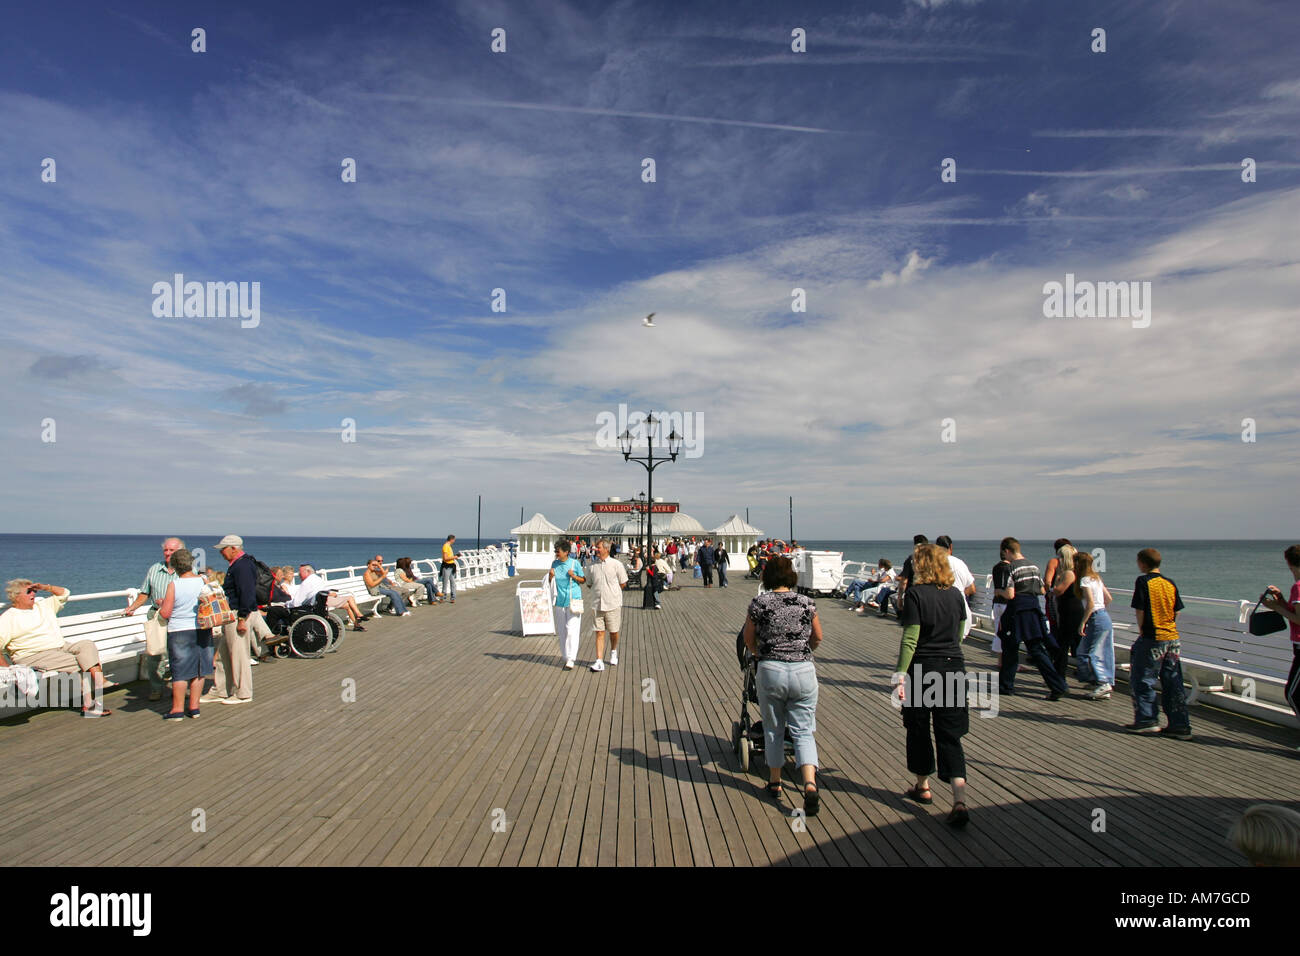 Tourists stroll down the restored wooden Pier boards of popular seaside town Cromer North Norfolk coast, East Anglia England UK Stock Photo